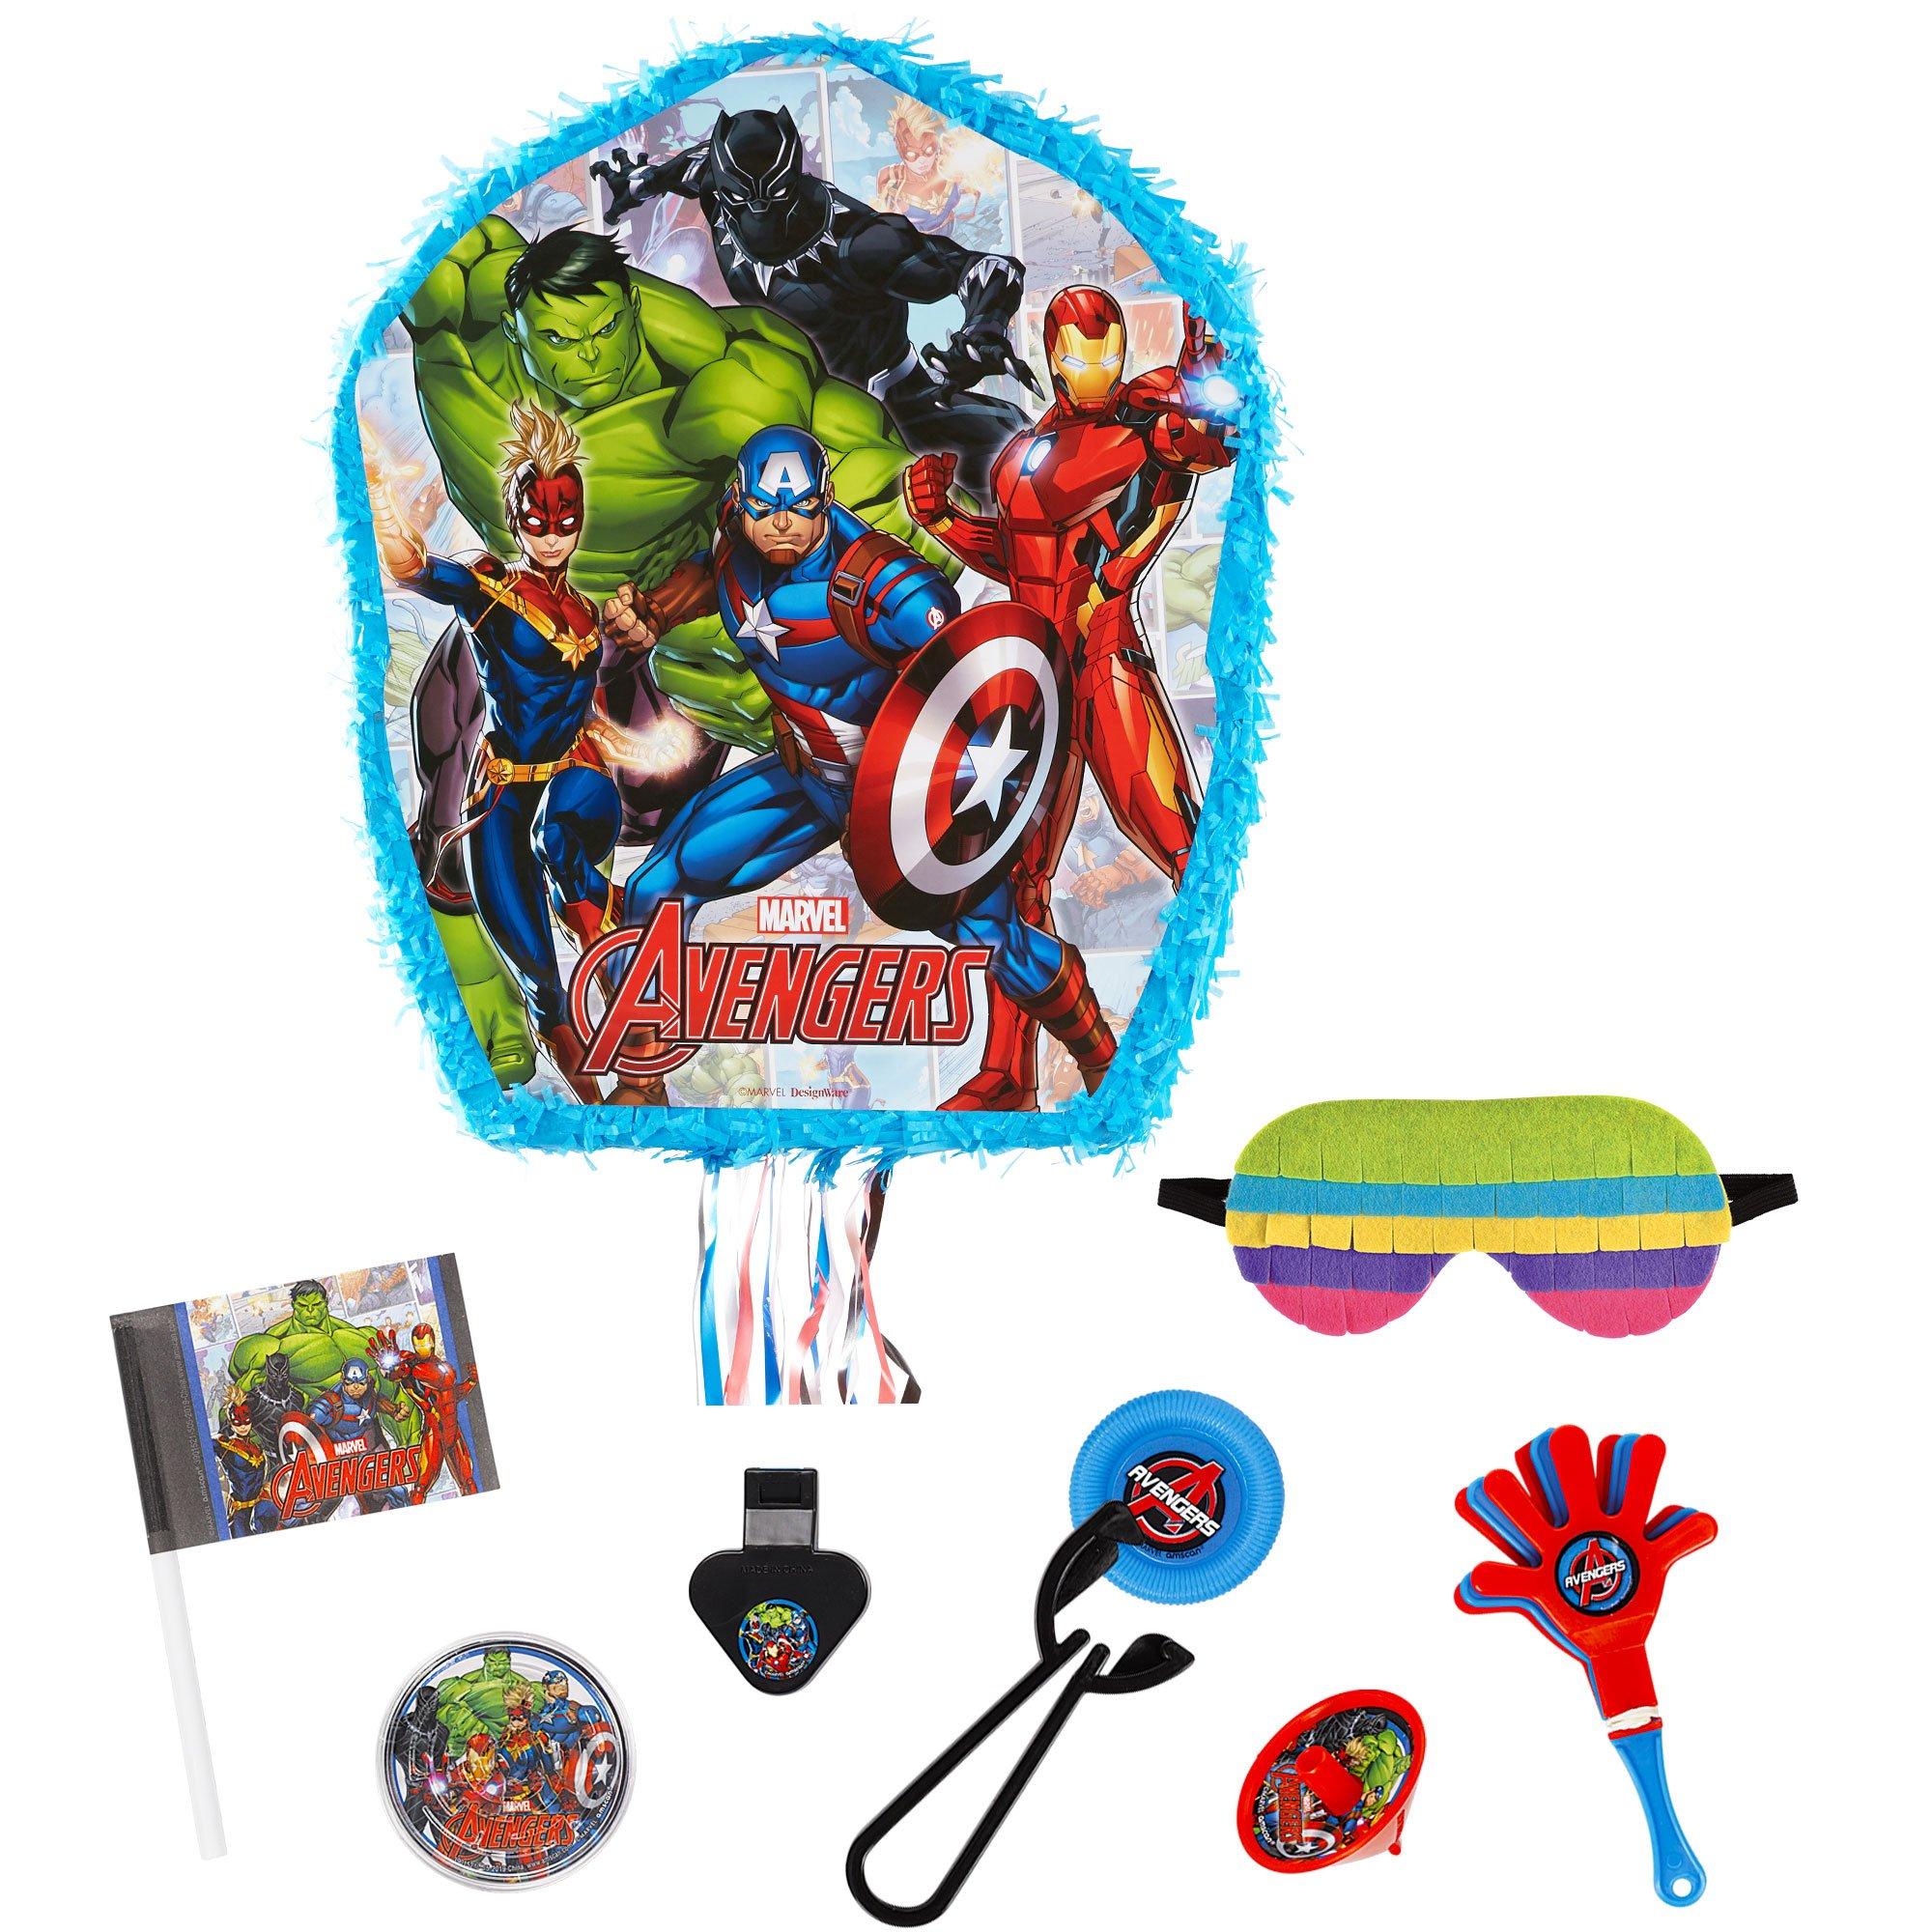 The Pull String Marvel Powers Unite Pinata Kit with Favors makes a perfect  party decoration and activity for guests. This convenient kit includes a  pull-string pinata, a colorful blindfold, a matching pinata